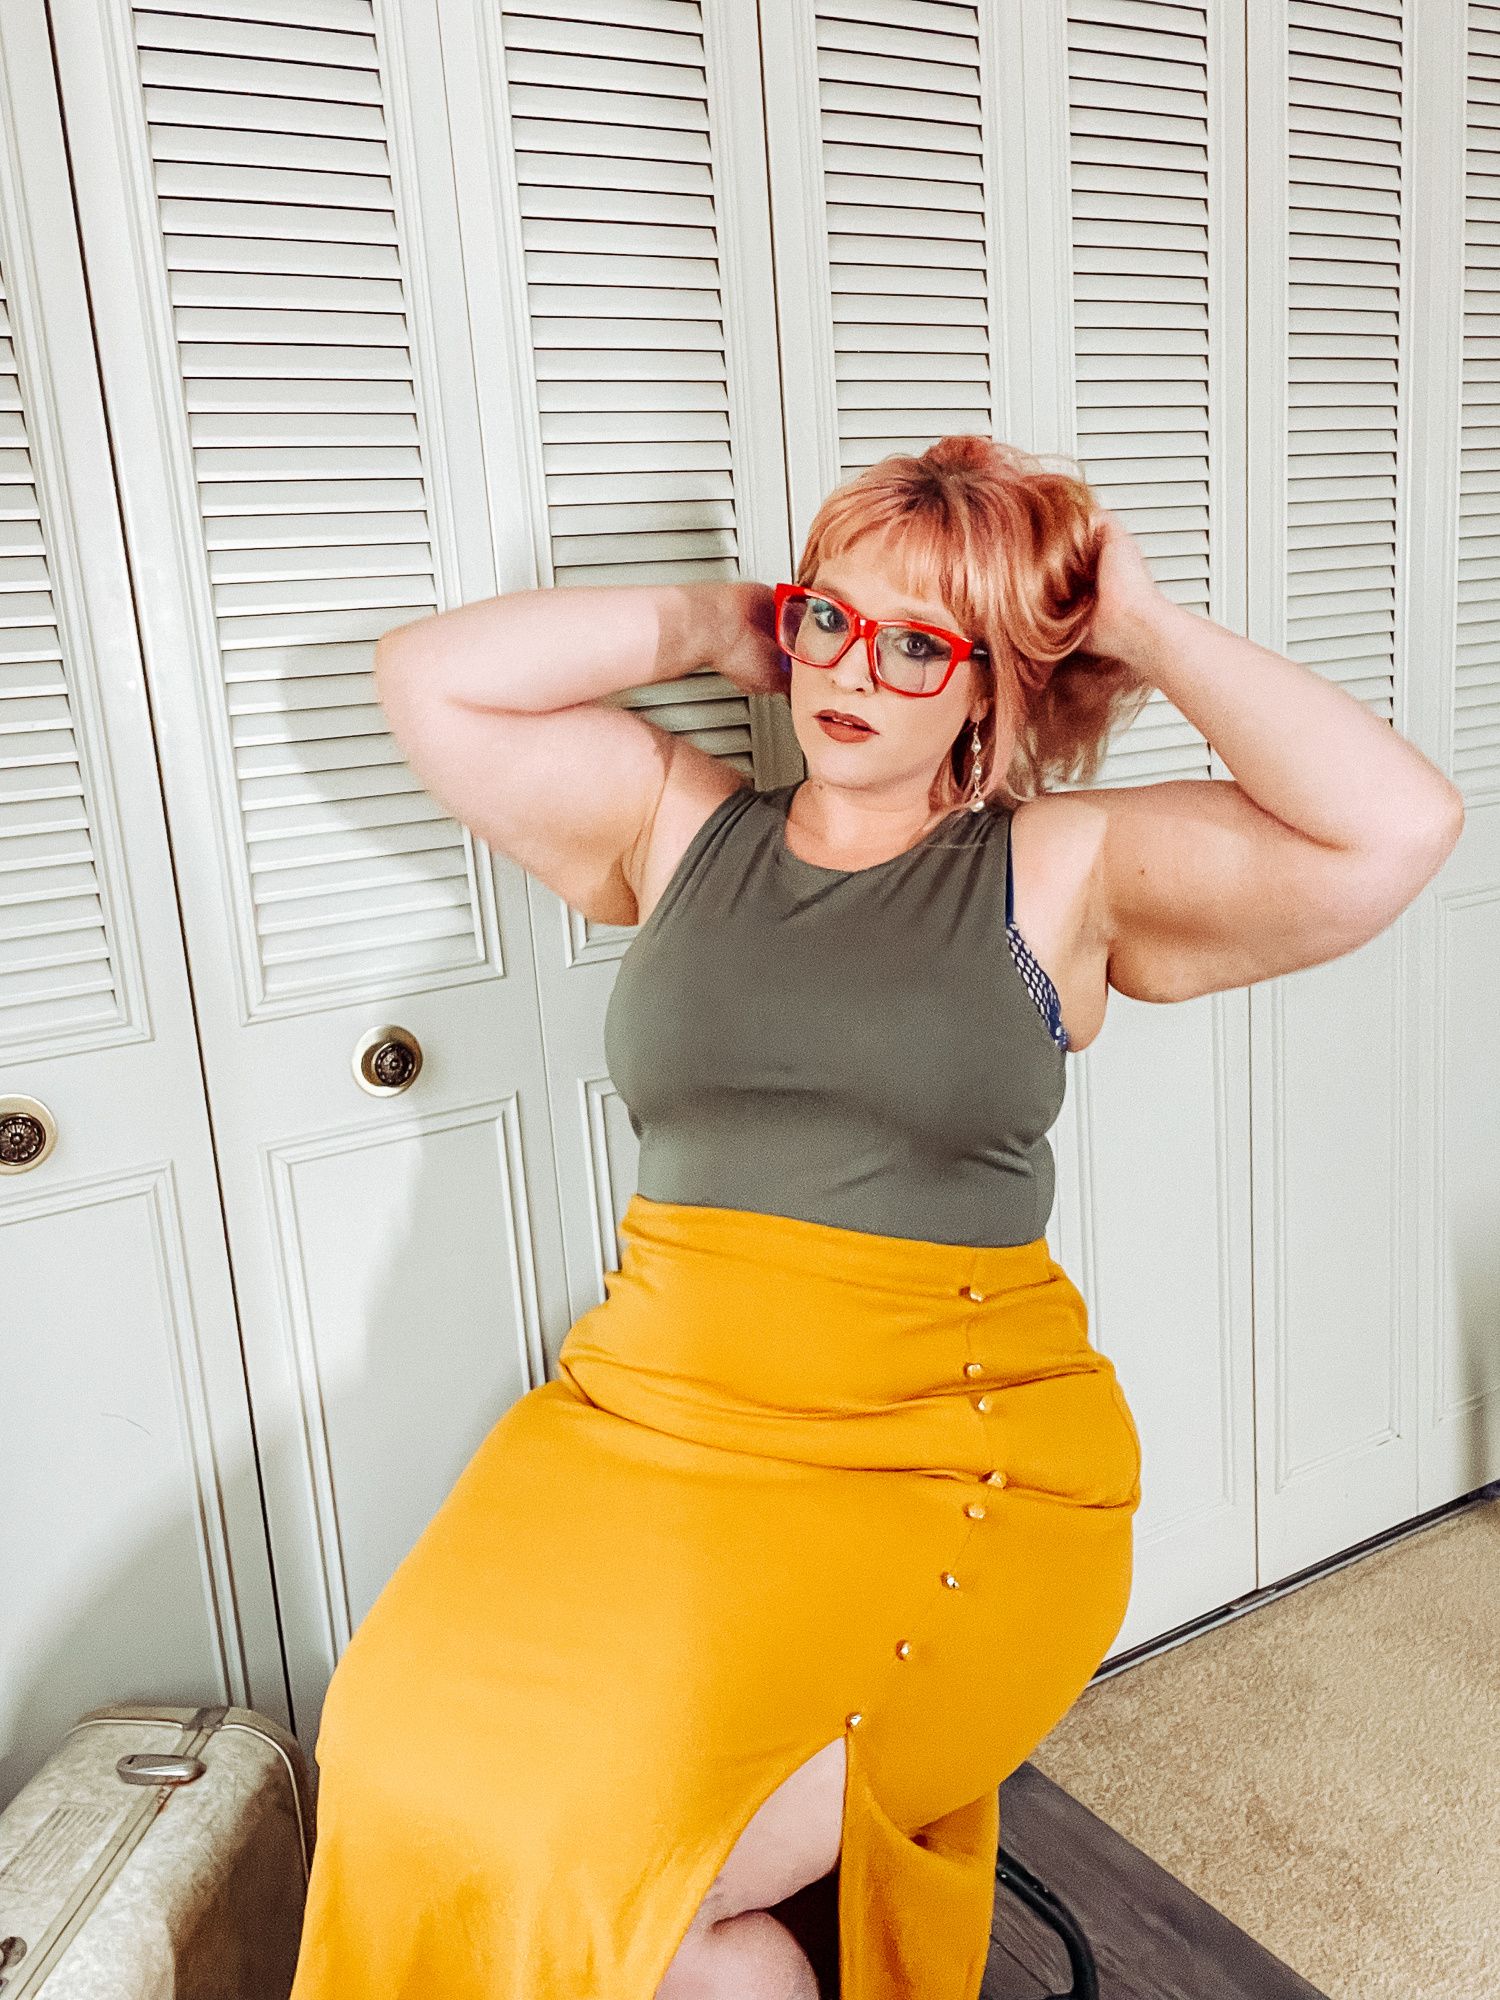 BBW Office Whore Tight Skirt and heels #4